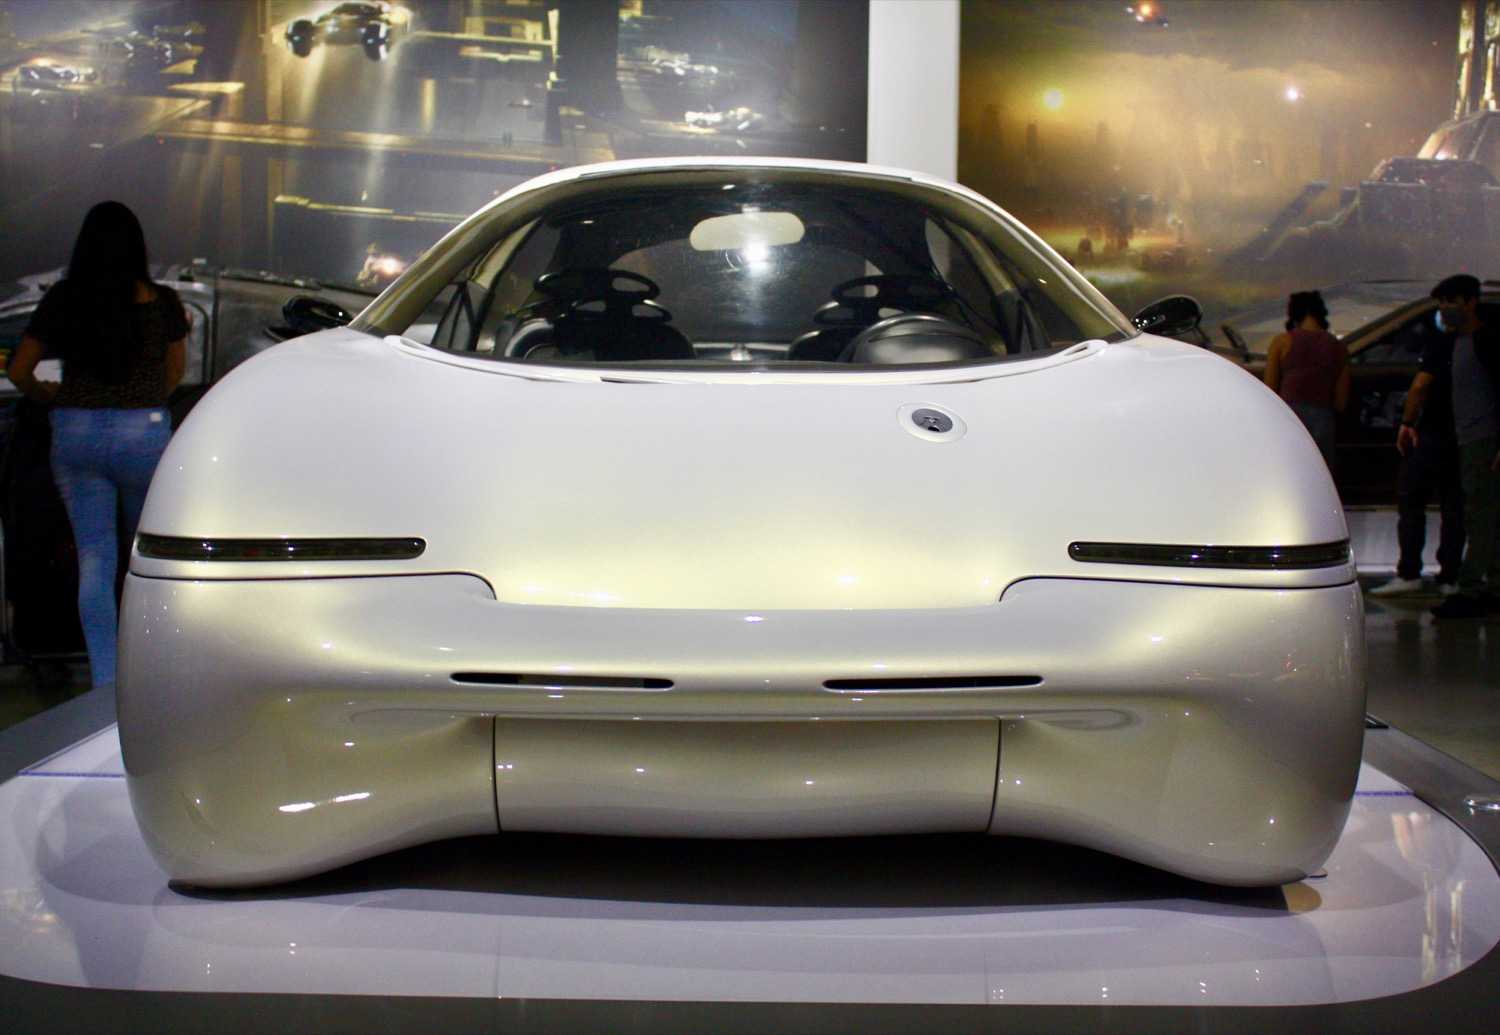 1992 Gm Ultralite Concept Could Achieve 100 Mpg Live Photo Gallery